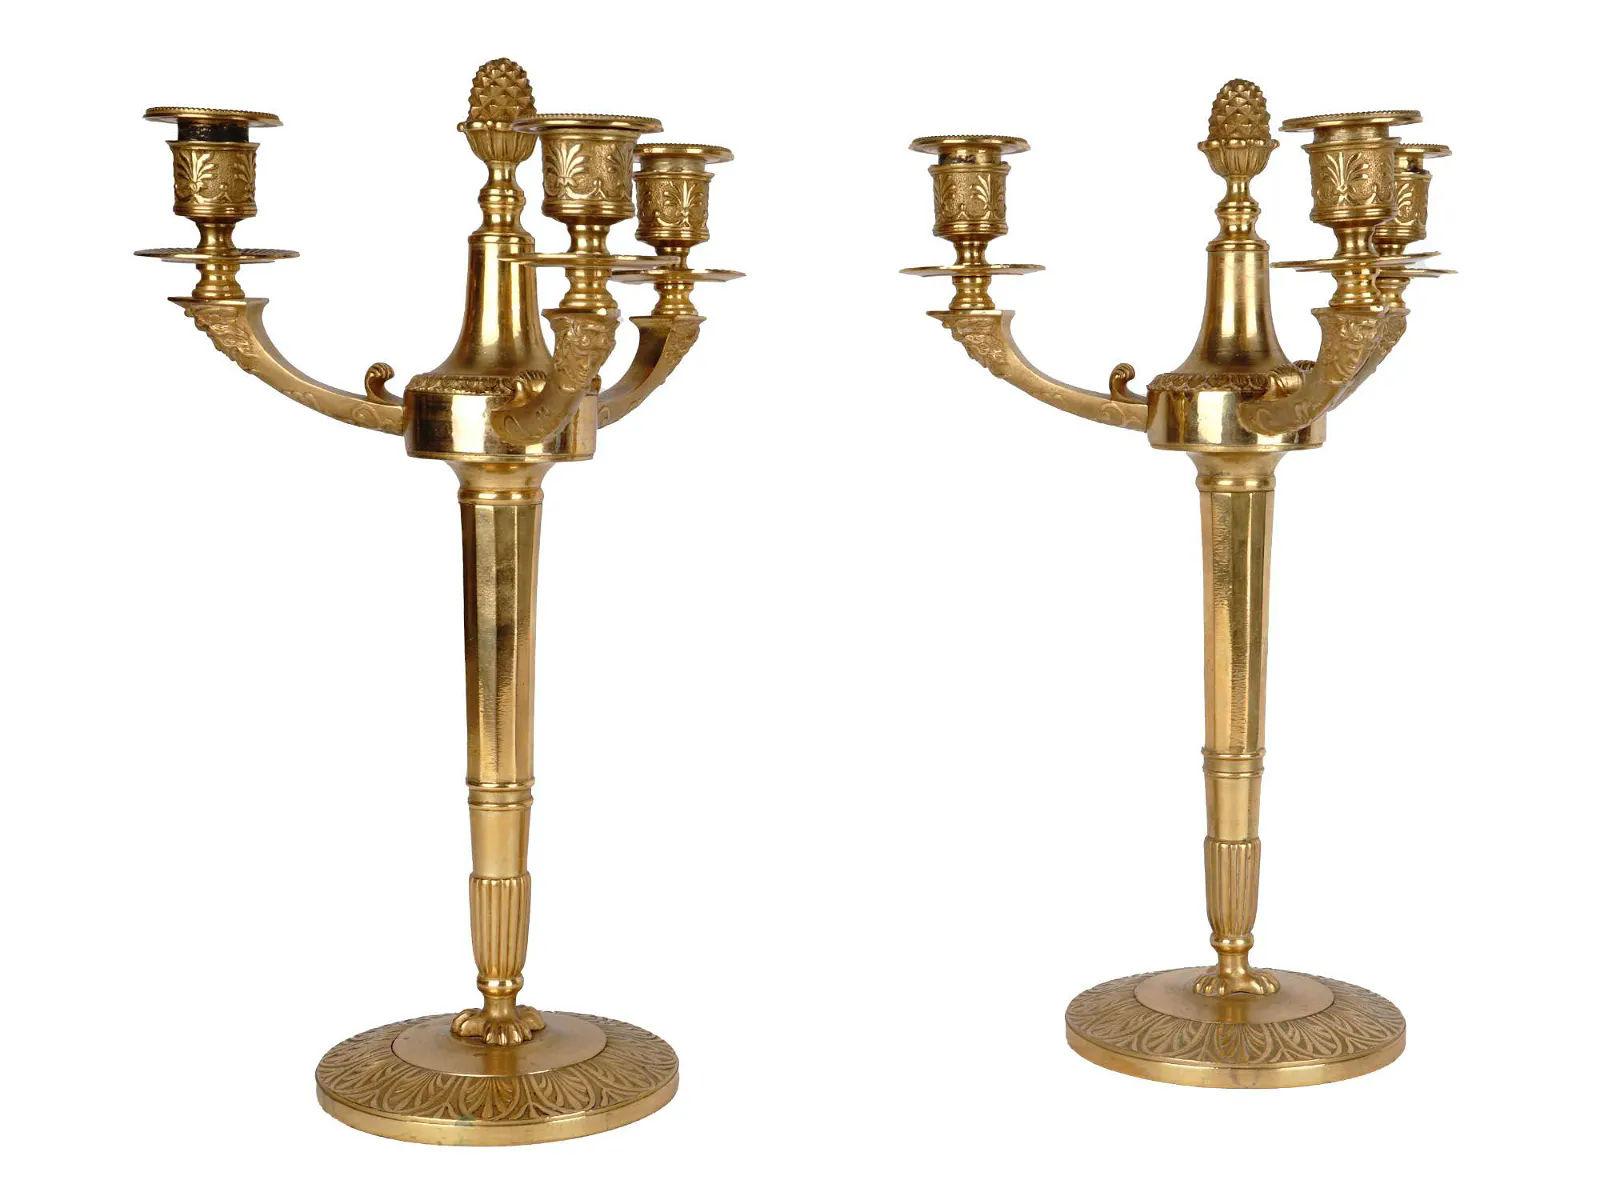 Pair of exceptional French 19th century three-light gilt bronze candelabra in the Empire style, circa 1860s. 

